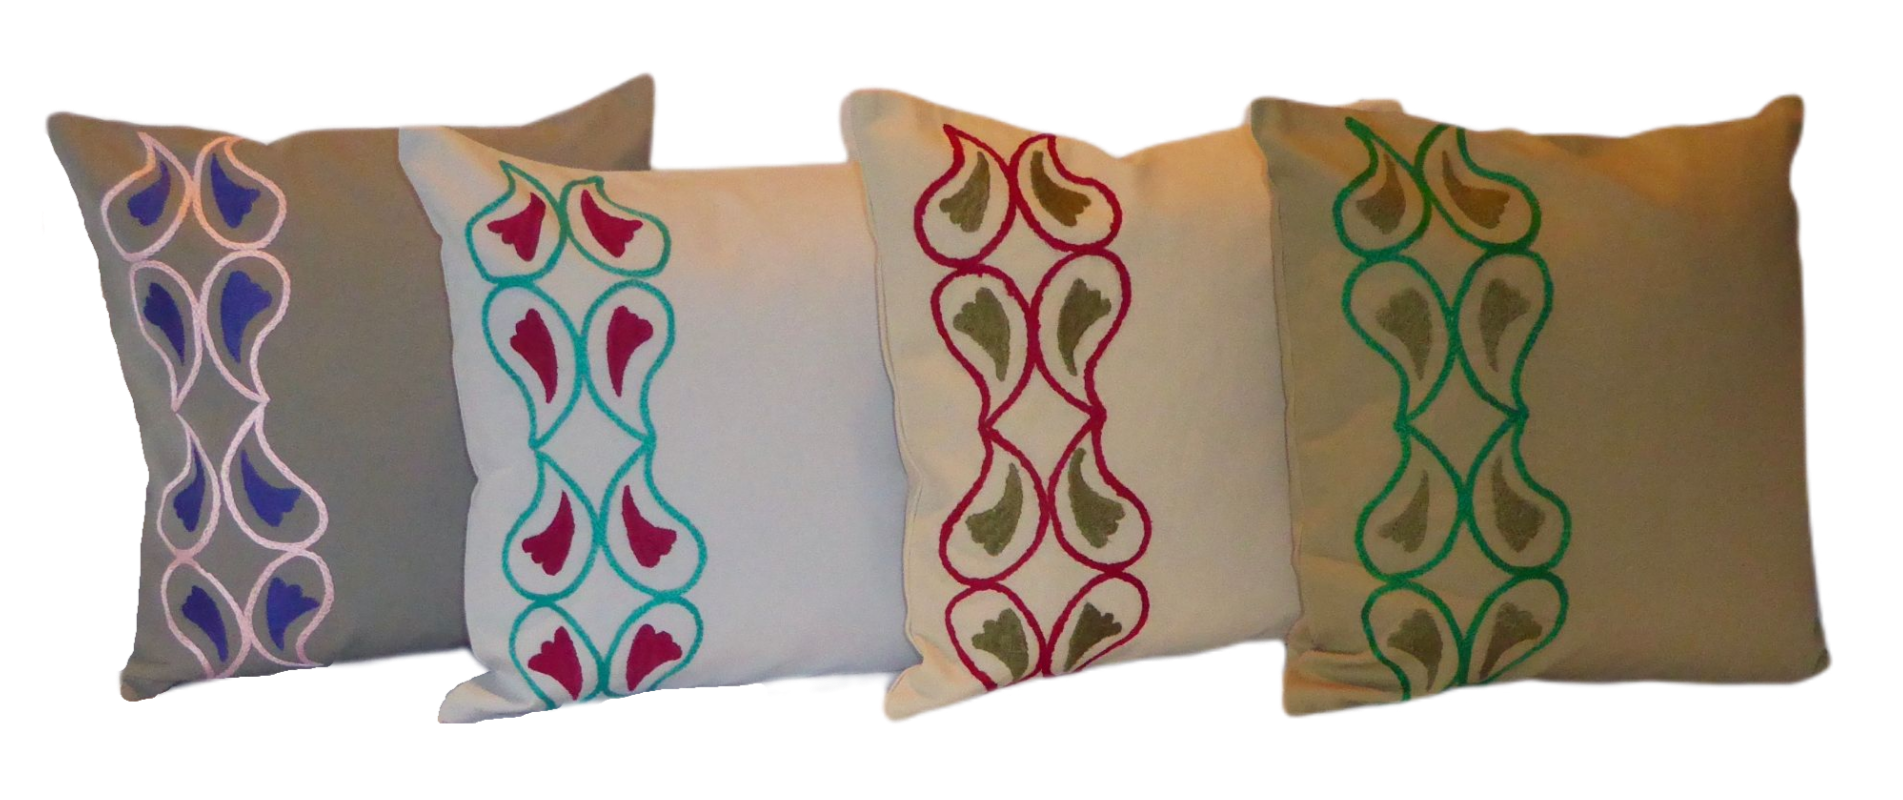 Cushions handembroidery